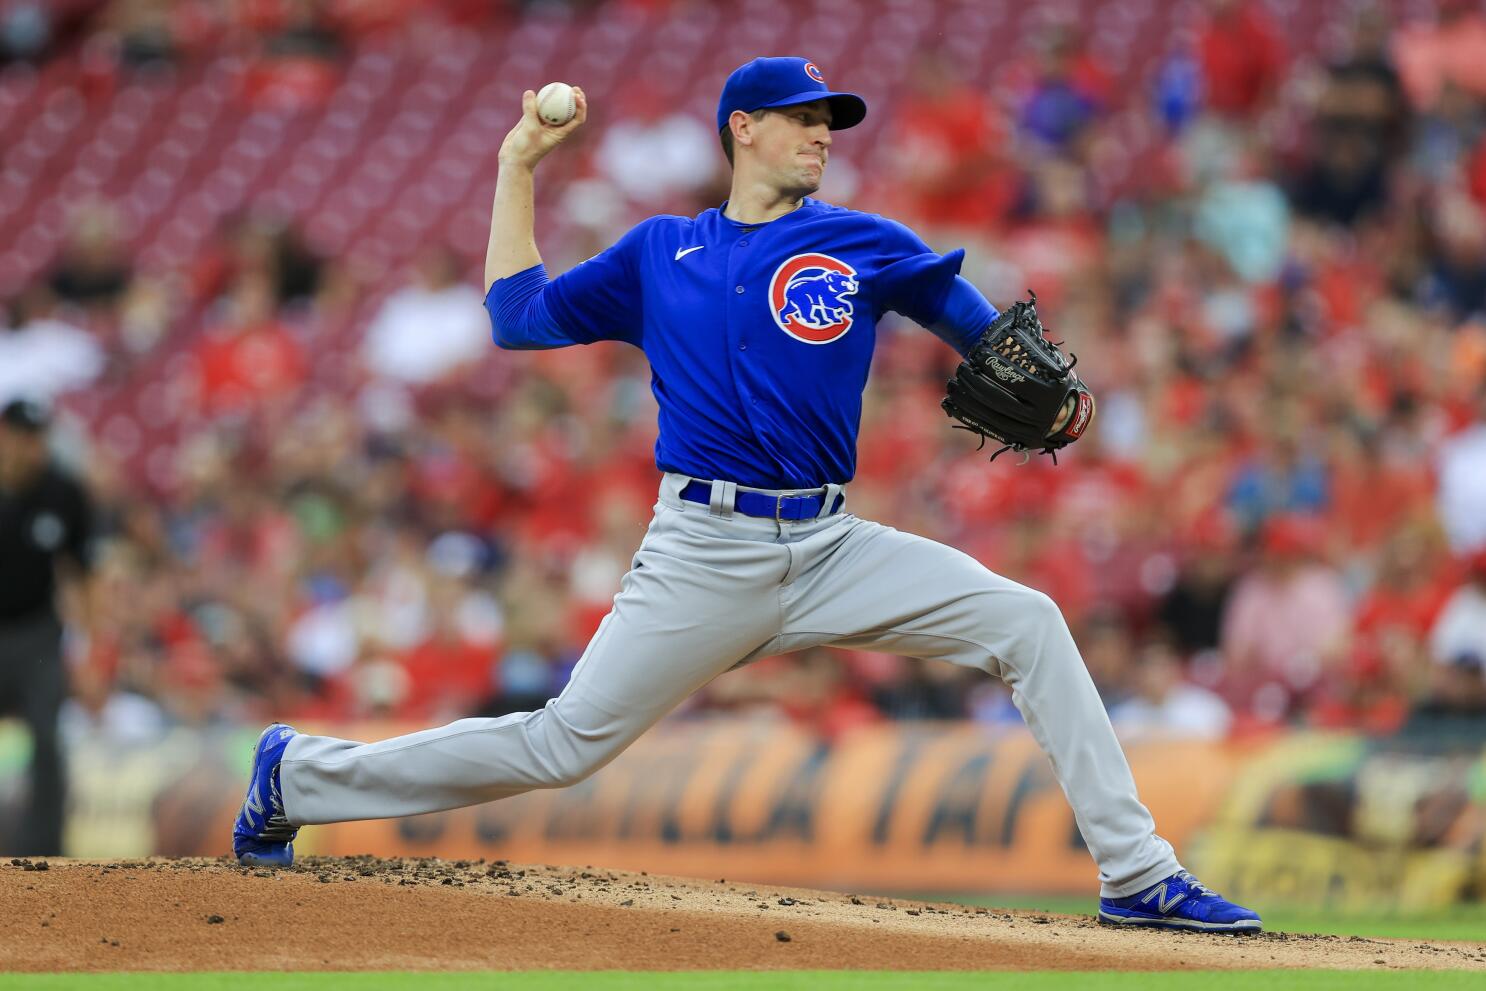 Kyle Hendricks tosses 5 strong innings in rehab outing with Iowa Cubs